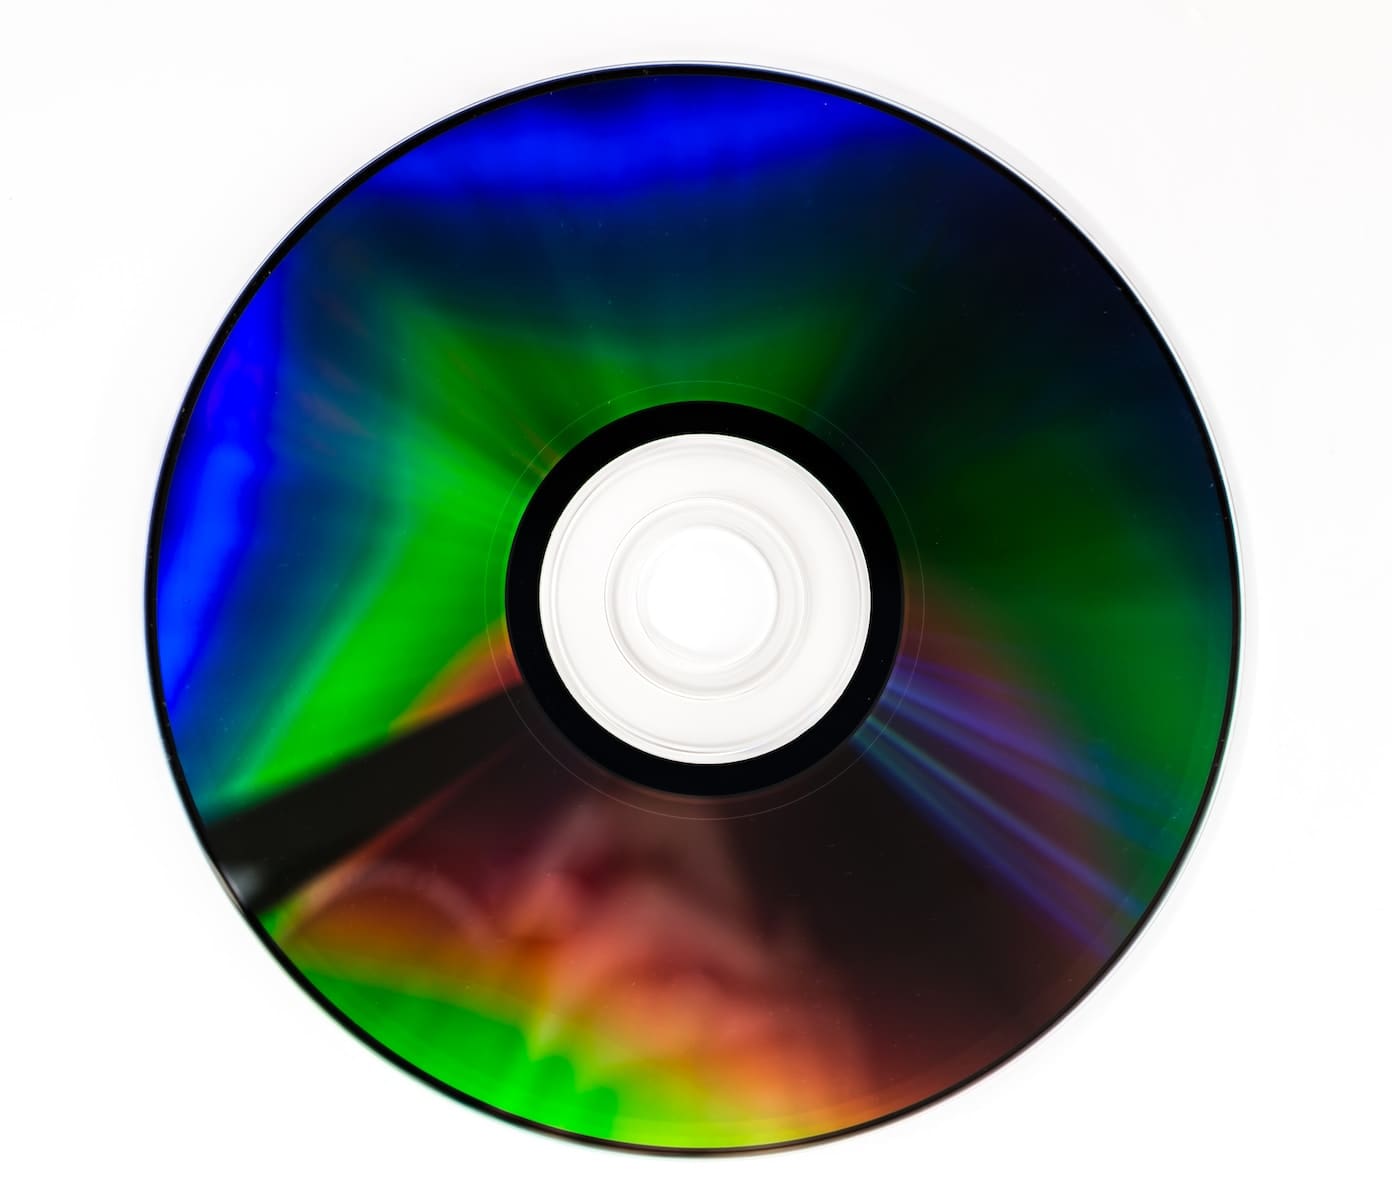 Cd-Rom Vs Dvd: Difference And Comparison